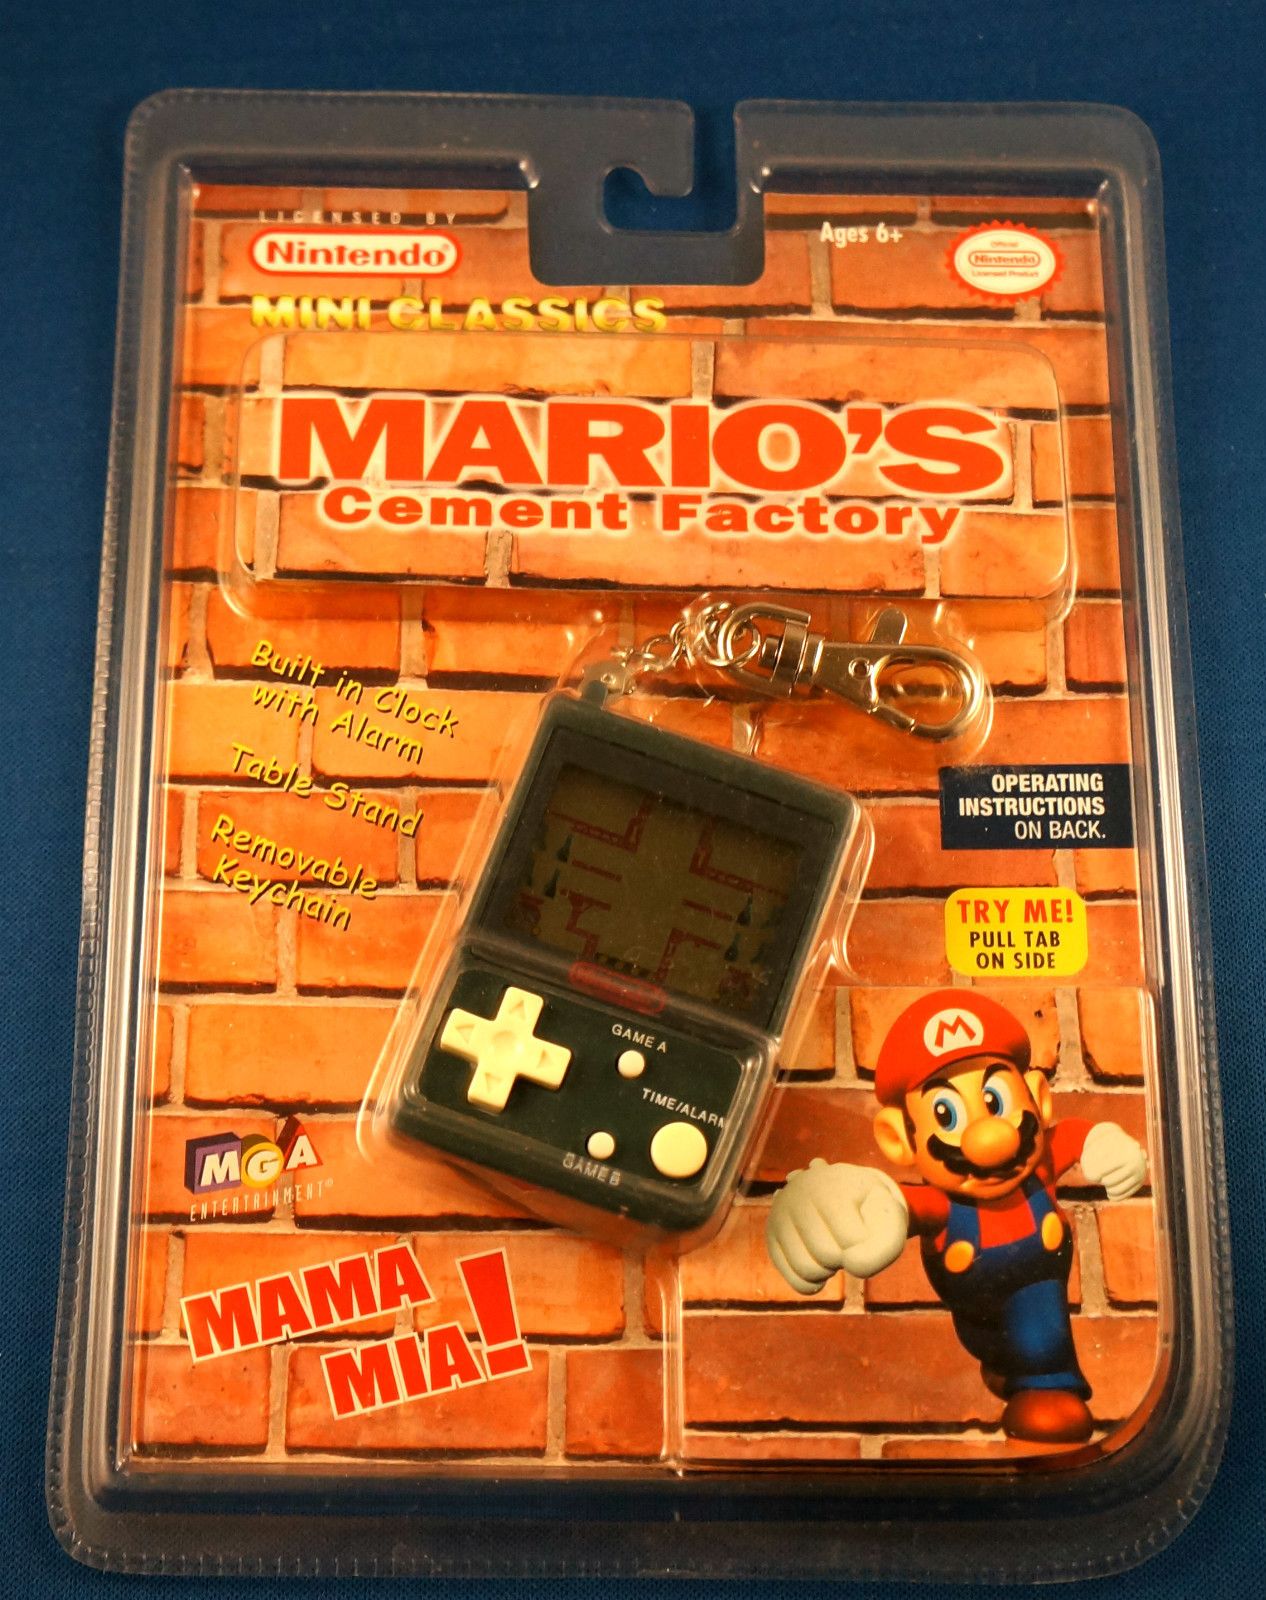  mini classic keychain game by Nintendo. Mint in package, never opened